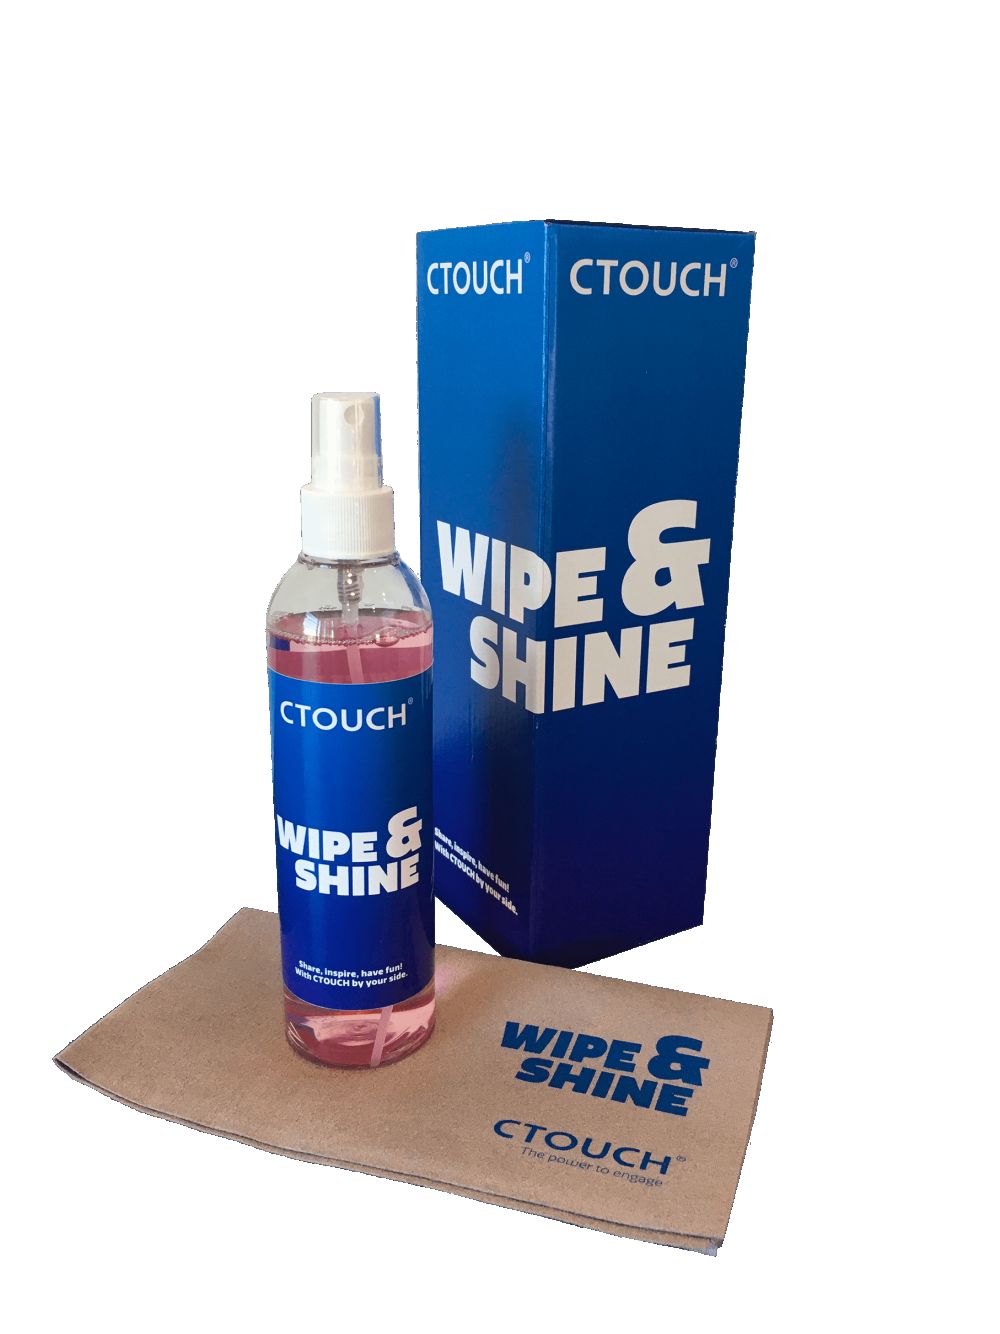 Ctouch Whipe Shine product